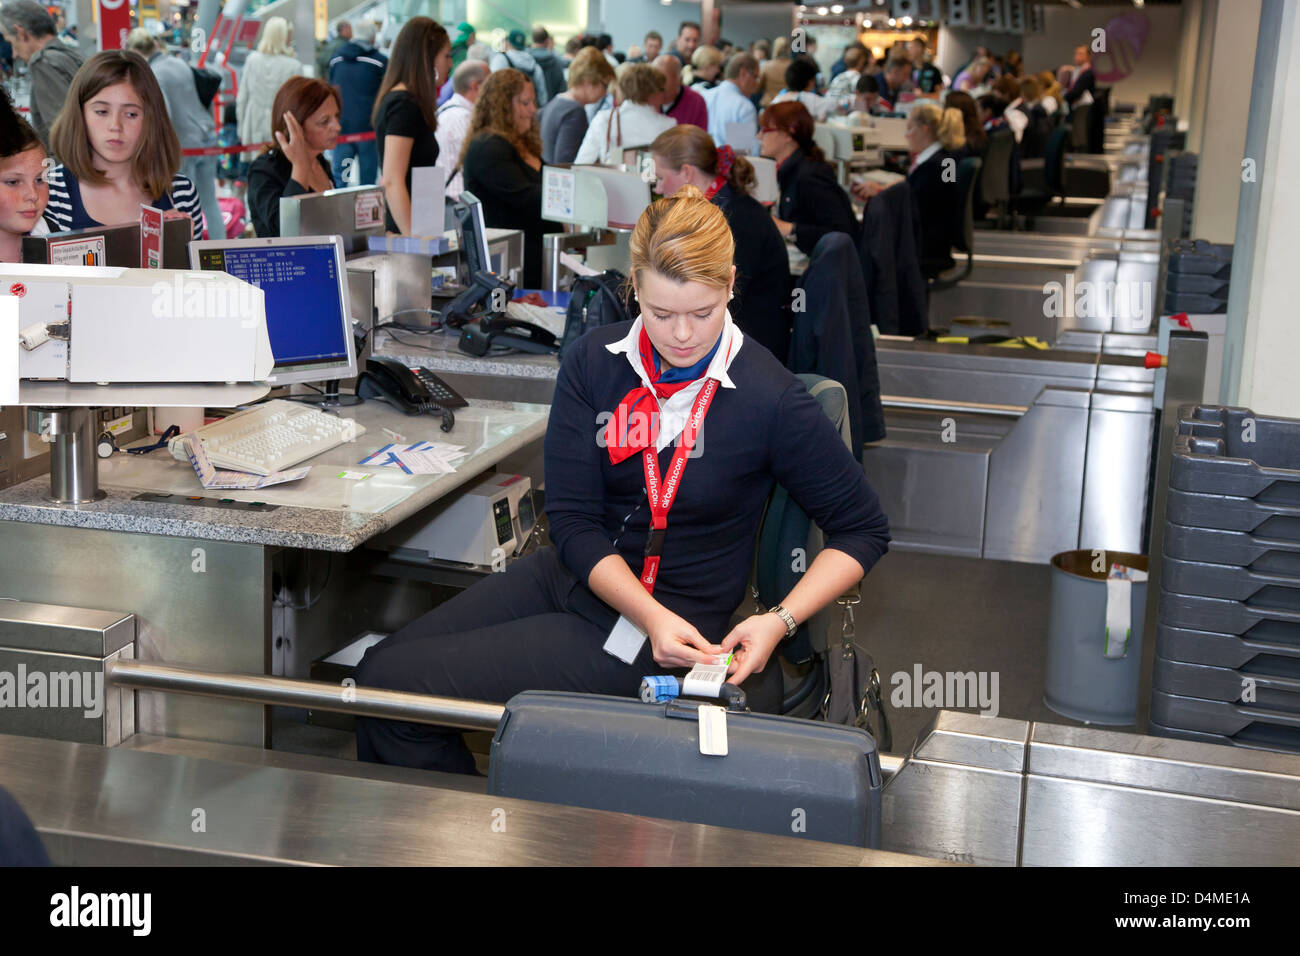 Duesseldorf, Germany, ground staff at airberlin check-in desk at the airport Duesseldorf International Stock Photo